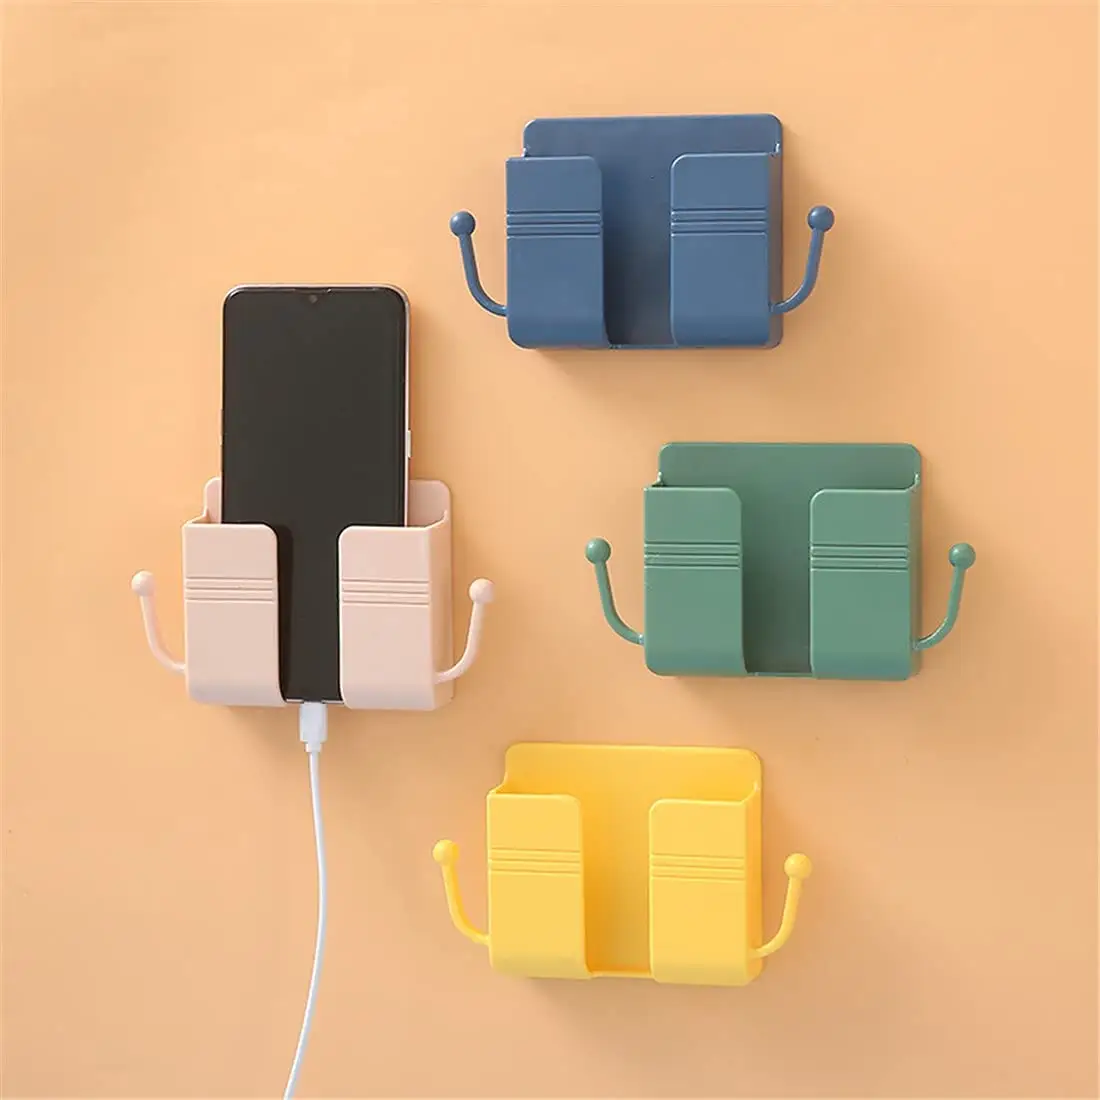 USLION Wall Mounted Mobile Phone Holder Multifunctional Holder Remote Control Storage Box Charger Hook Cable Charging Dock Stand